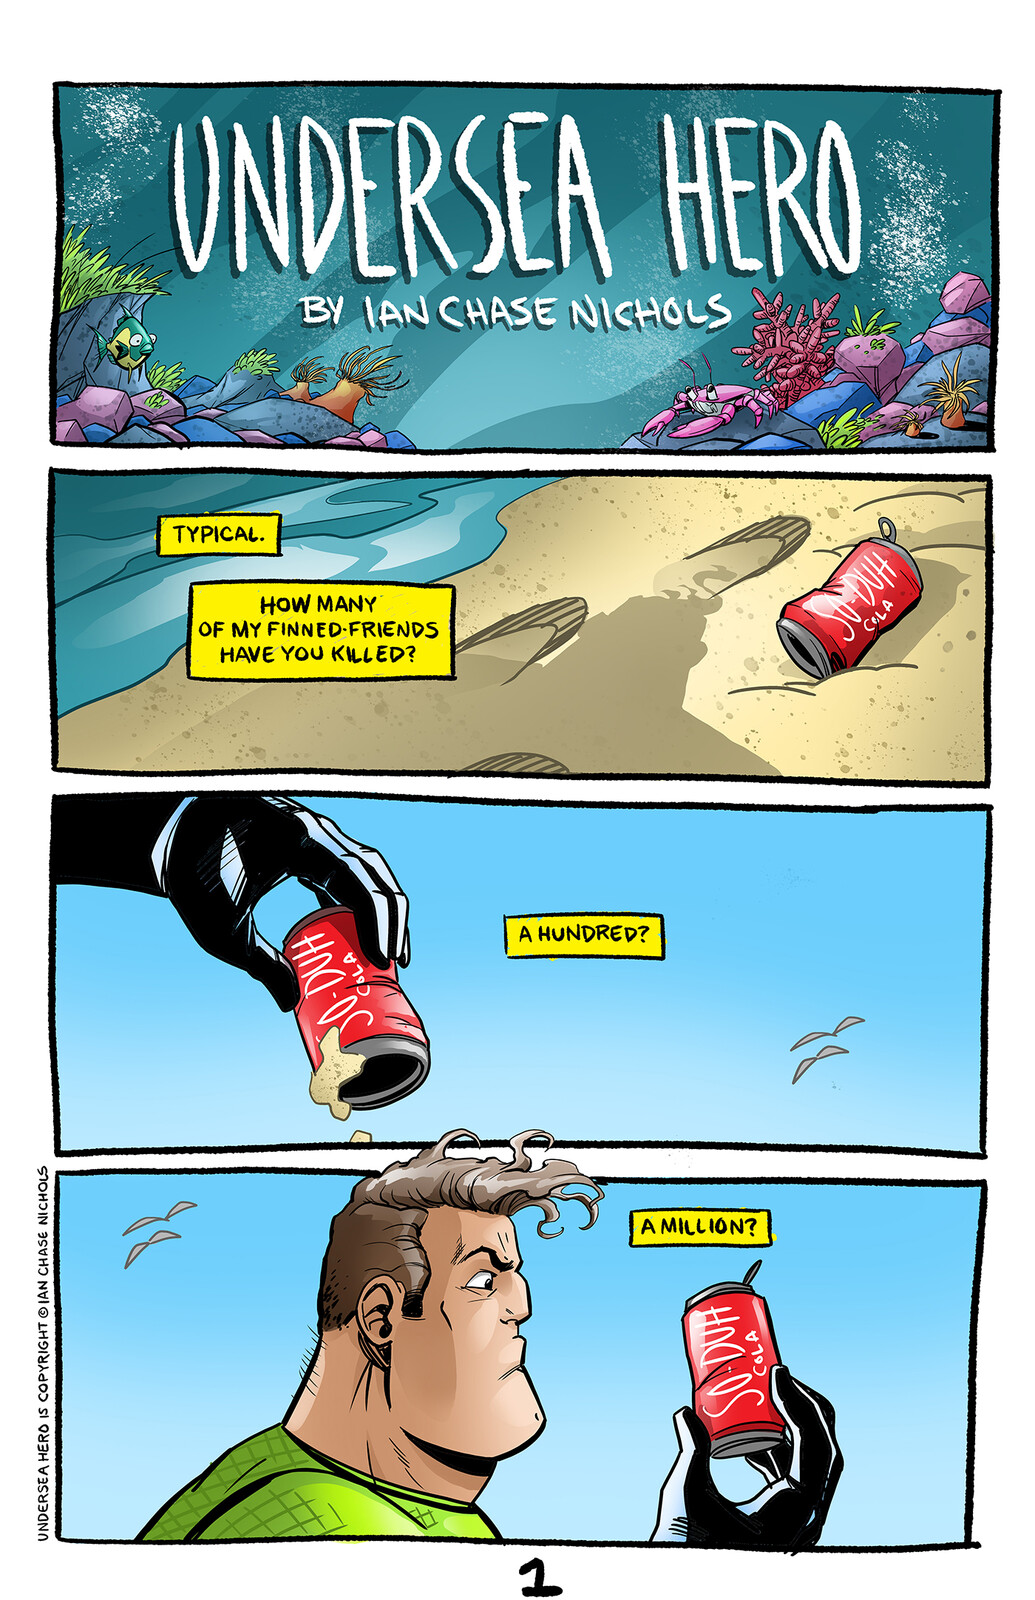 UNDERSEA HERO comic strip page one.

UNDERSEA HERO and all Related Characters are Copyright © and Trademark TM 2022 Ian Chase Nichols. All Rights Reserved.
